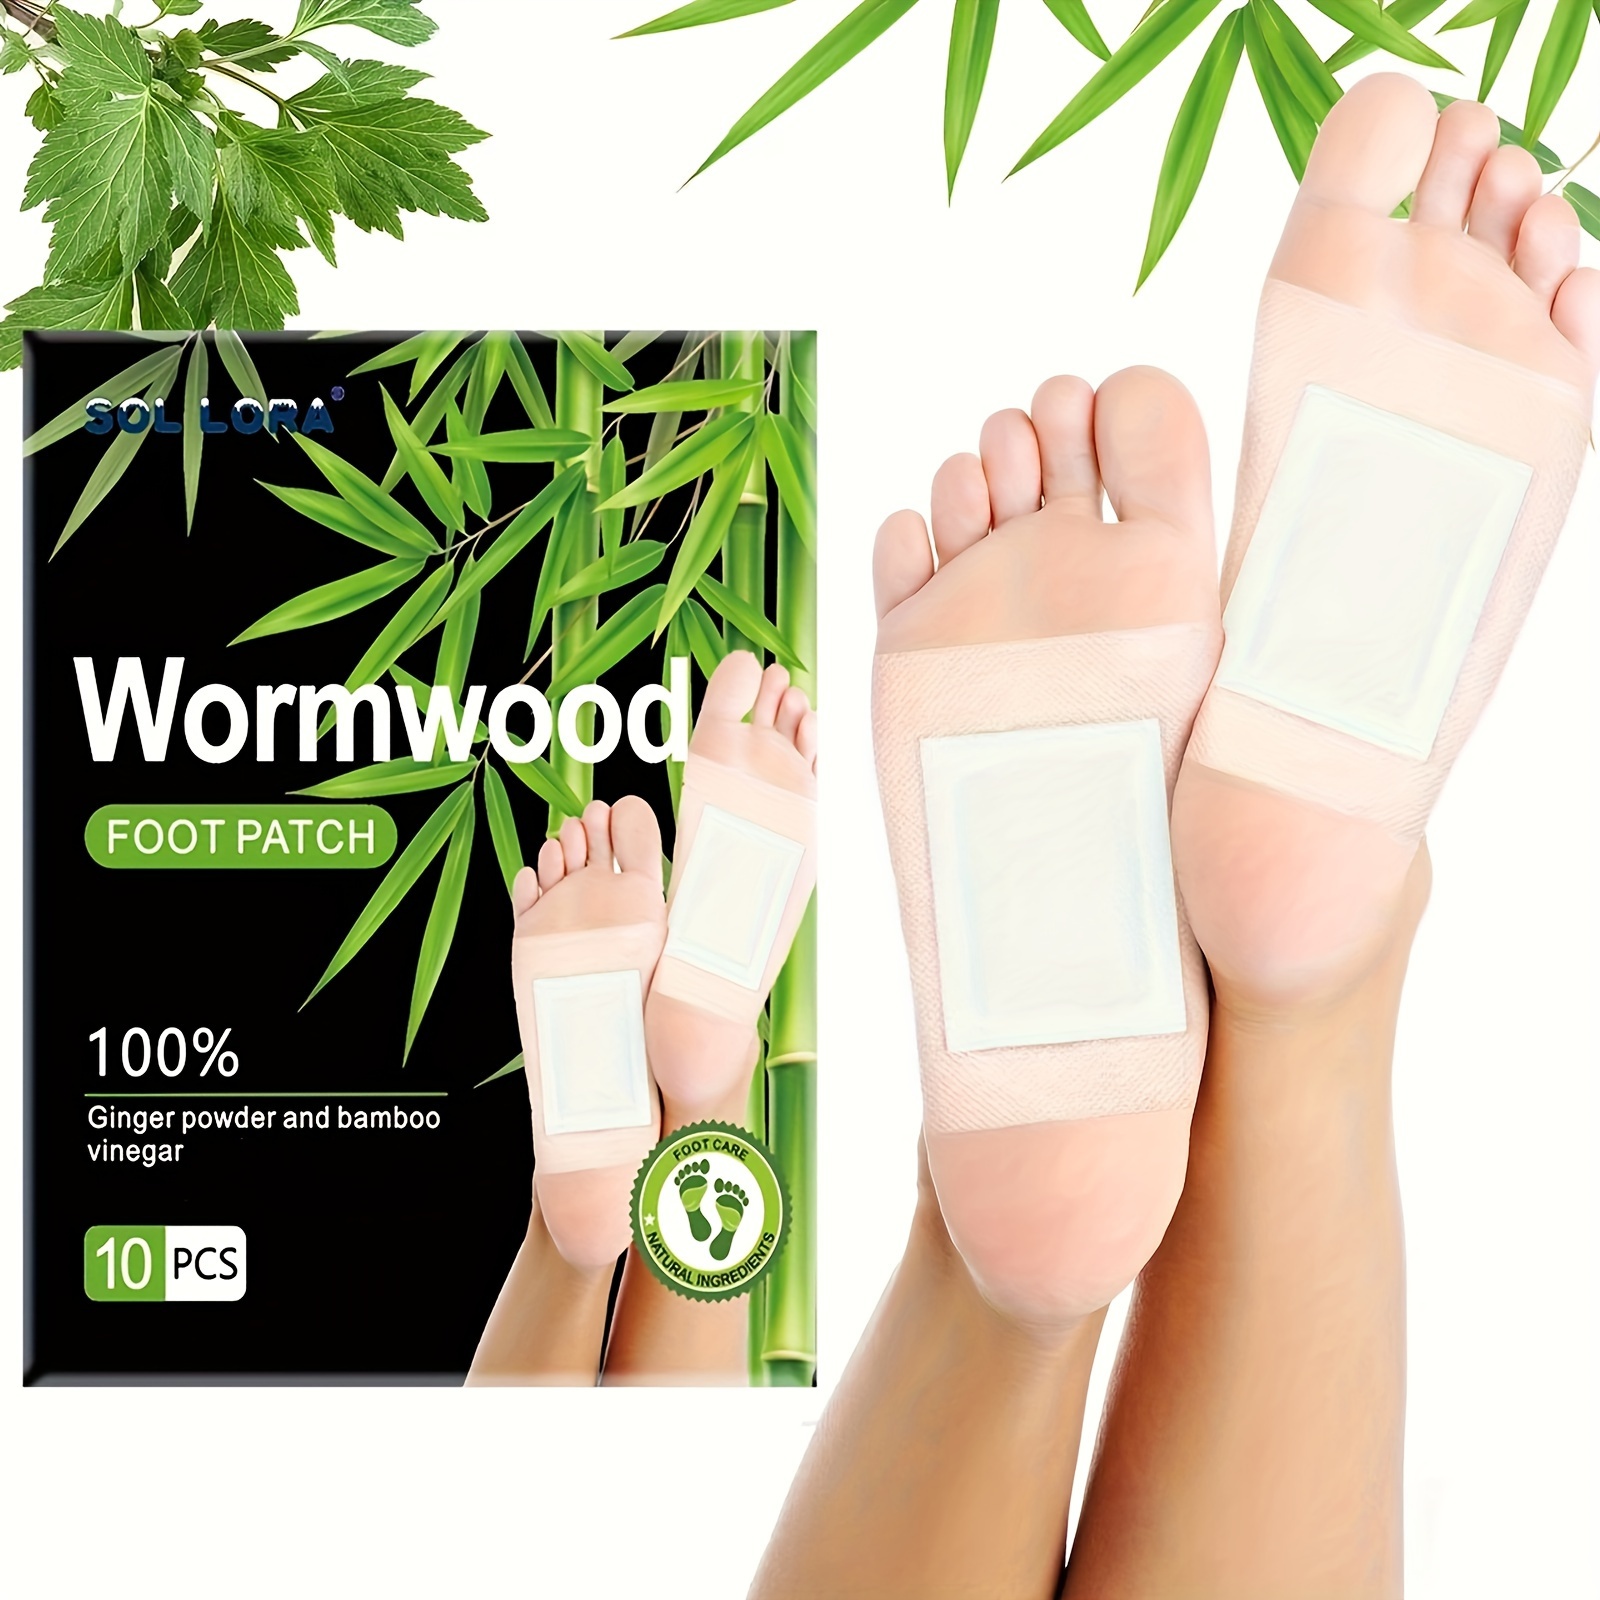 

10pcs, Wormwood Foot Patches With Ginger Powder And Bamboo Extract, Deep Cleaning Foot Pad With Natural Ingredients